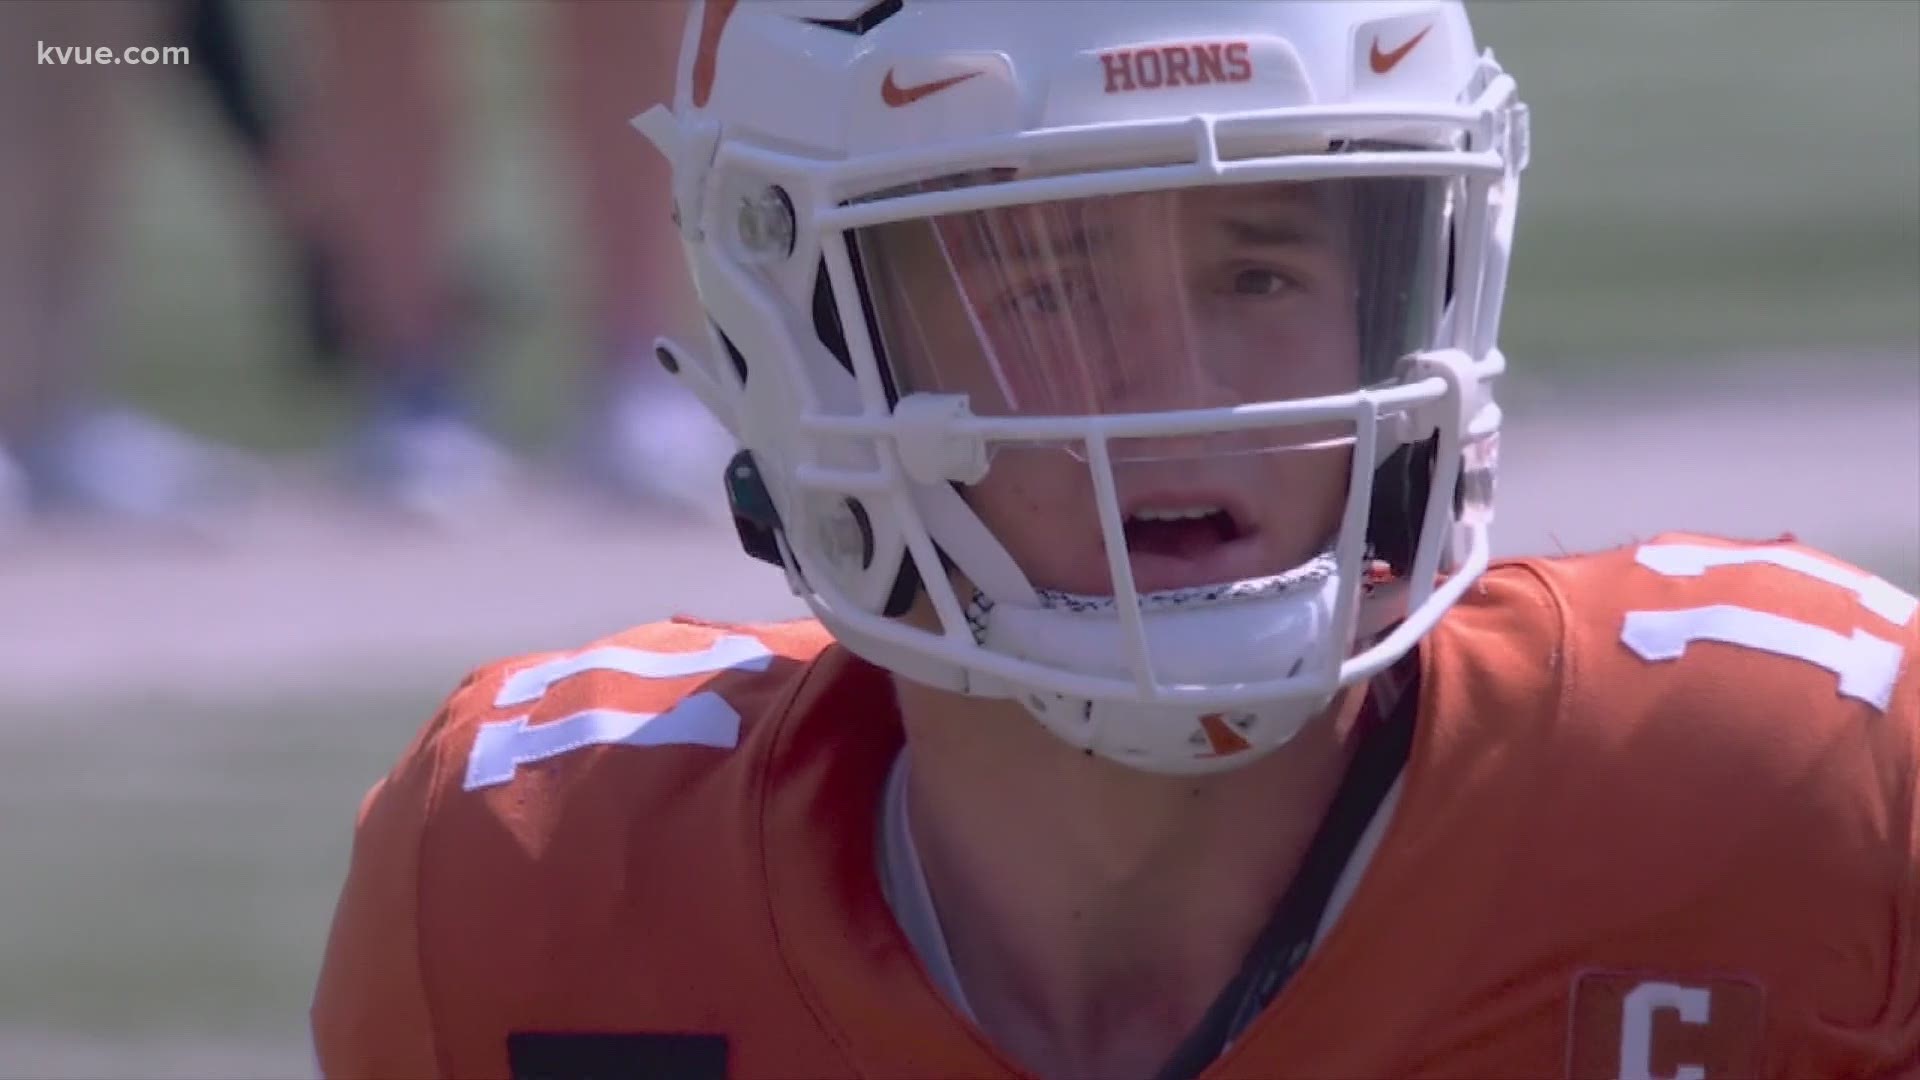 Quarterback Sam Ehlinger said he has had some very honest conversations with his teammates following the Longhorns' loss to TCU.